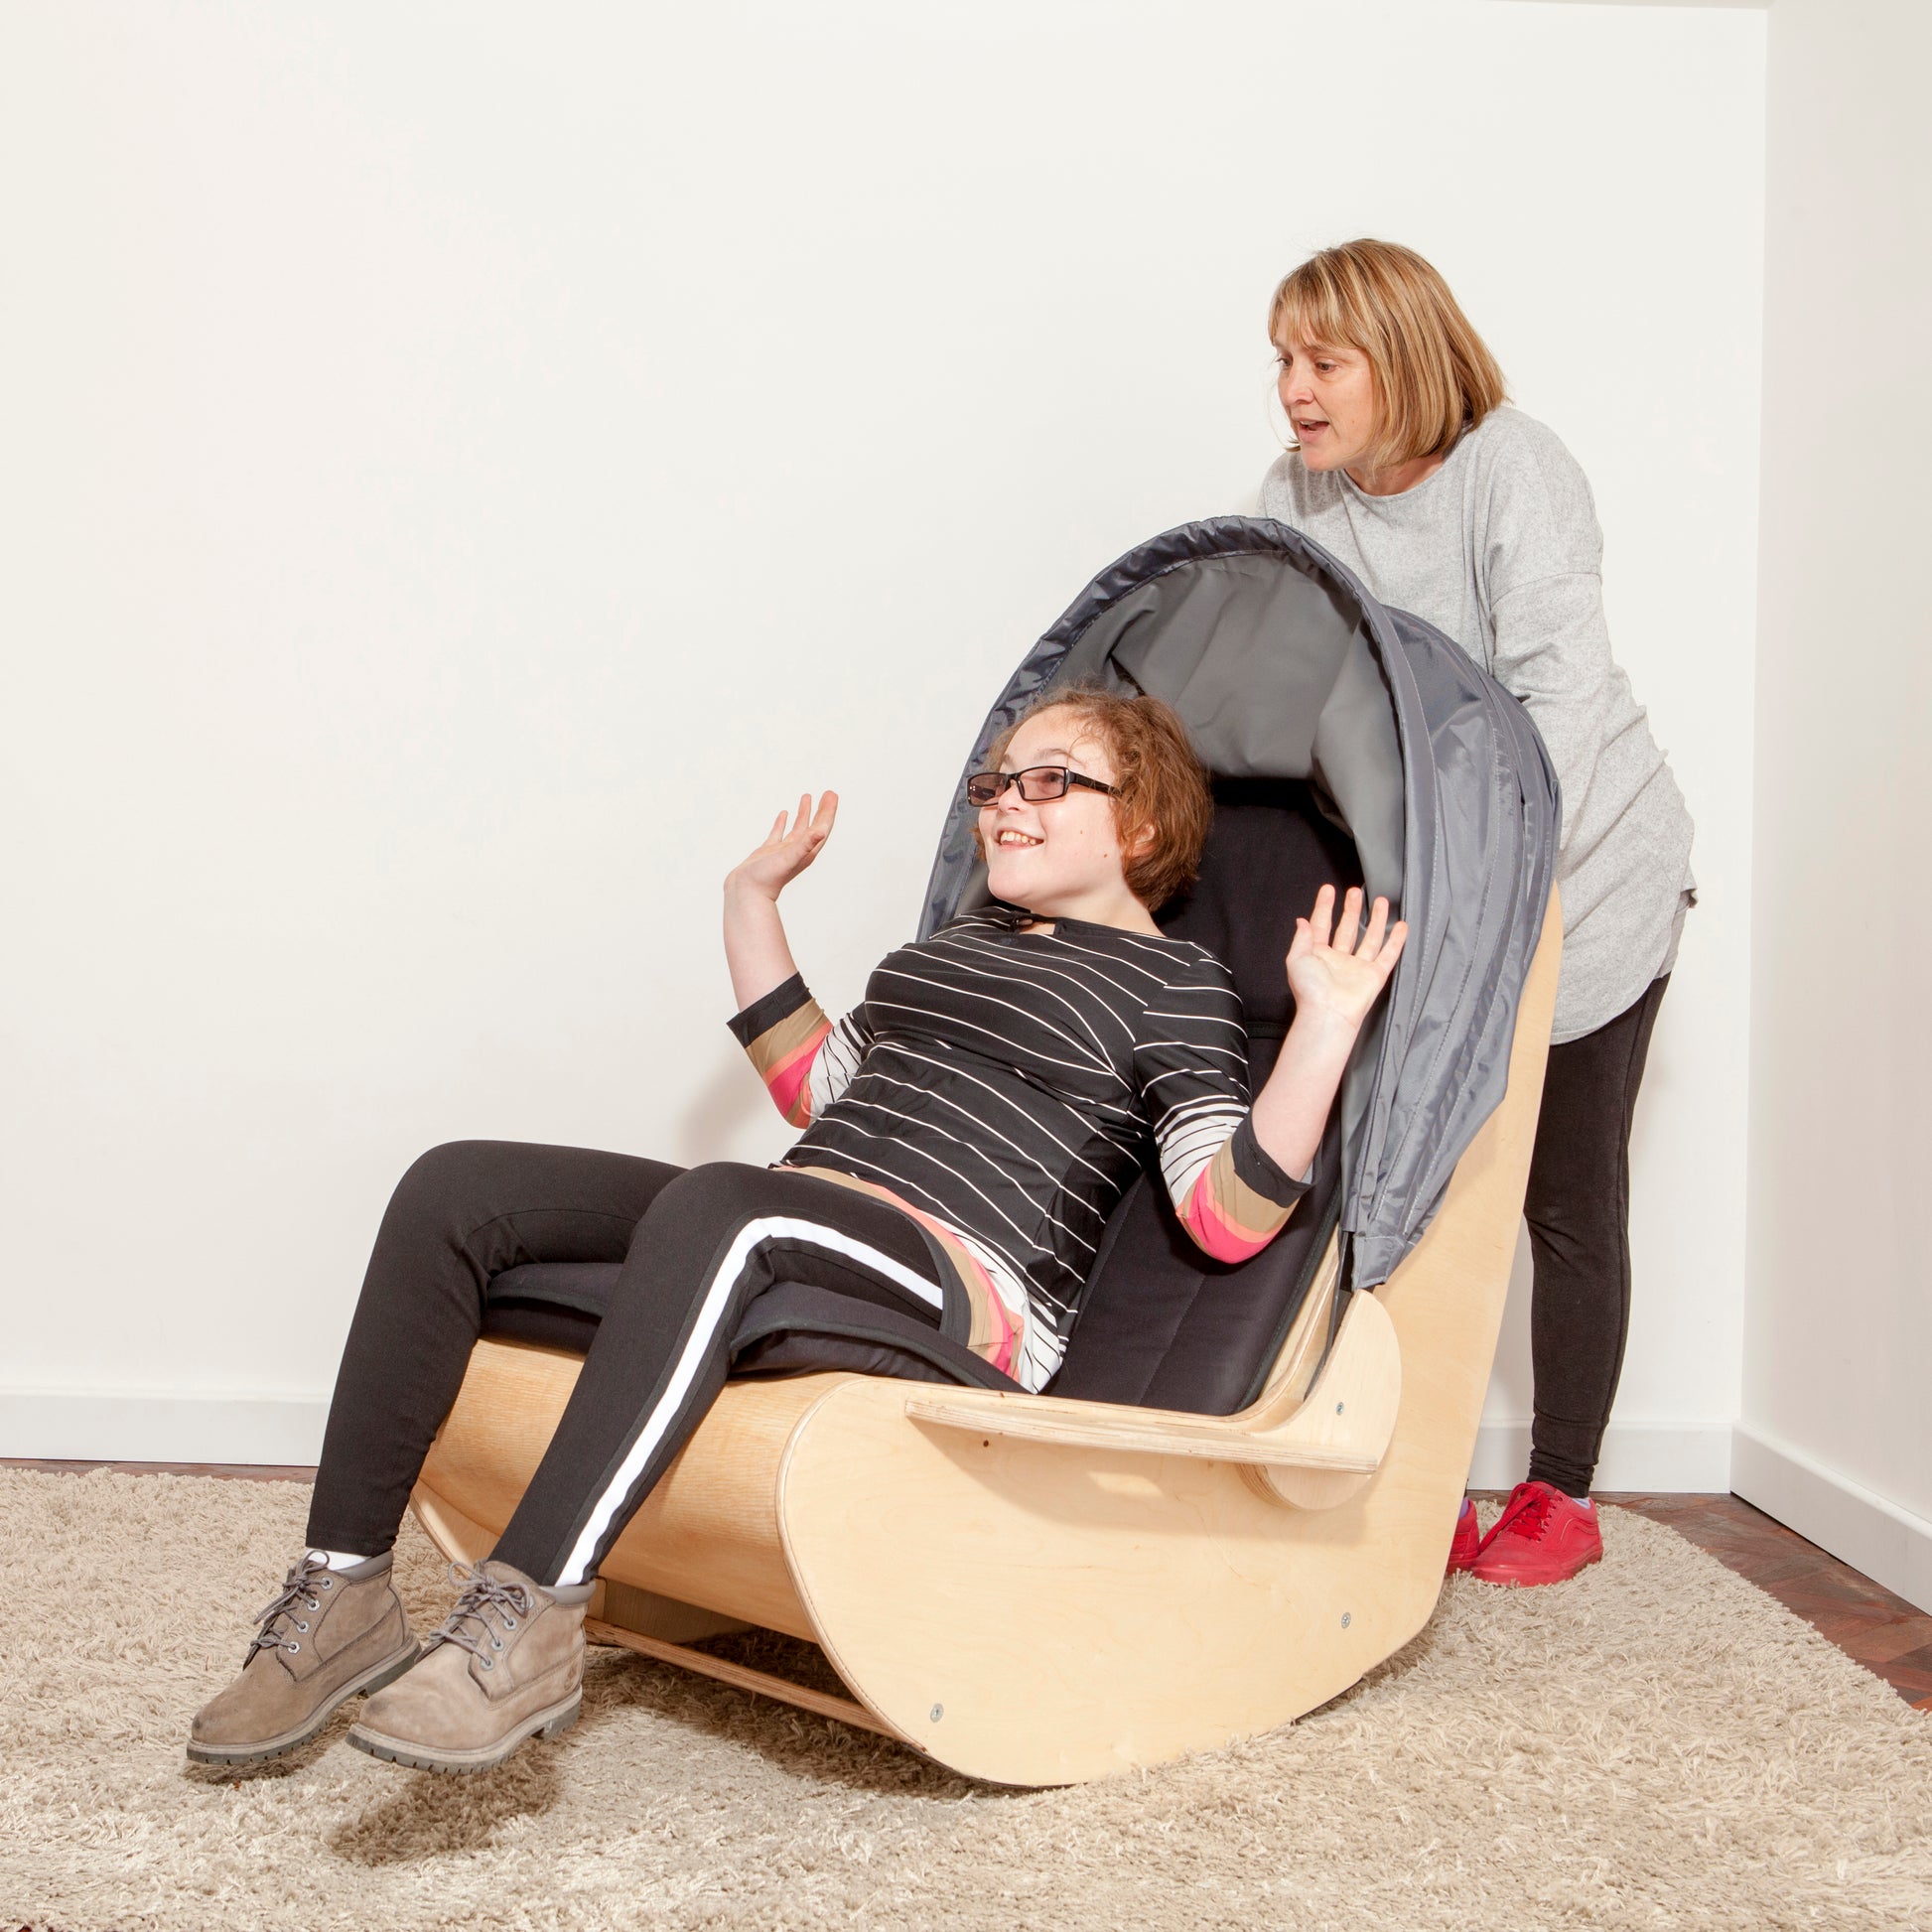 Teenager is rocked in the sensory shell chair by an adult holding the rear handles